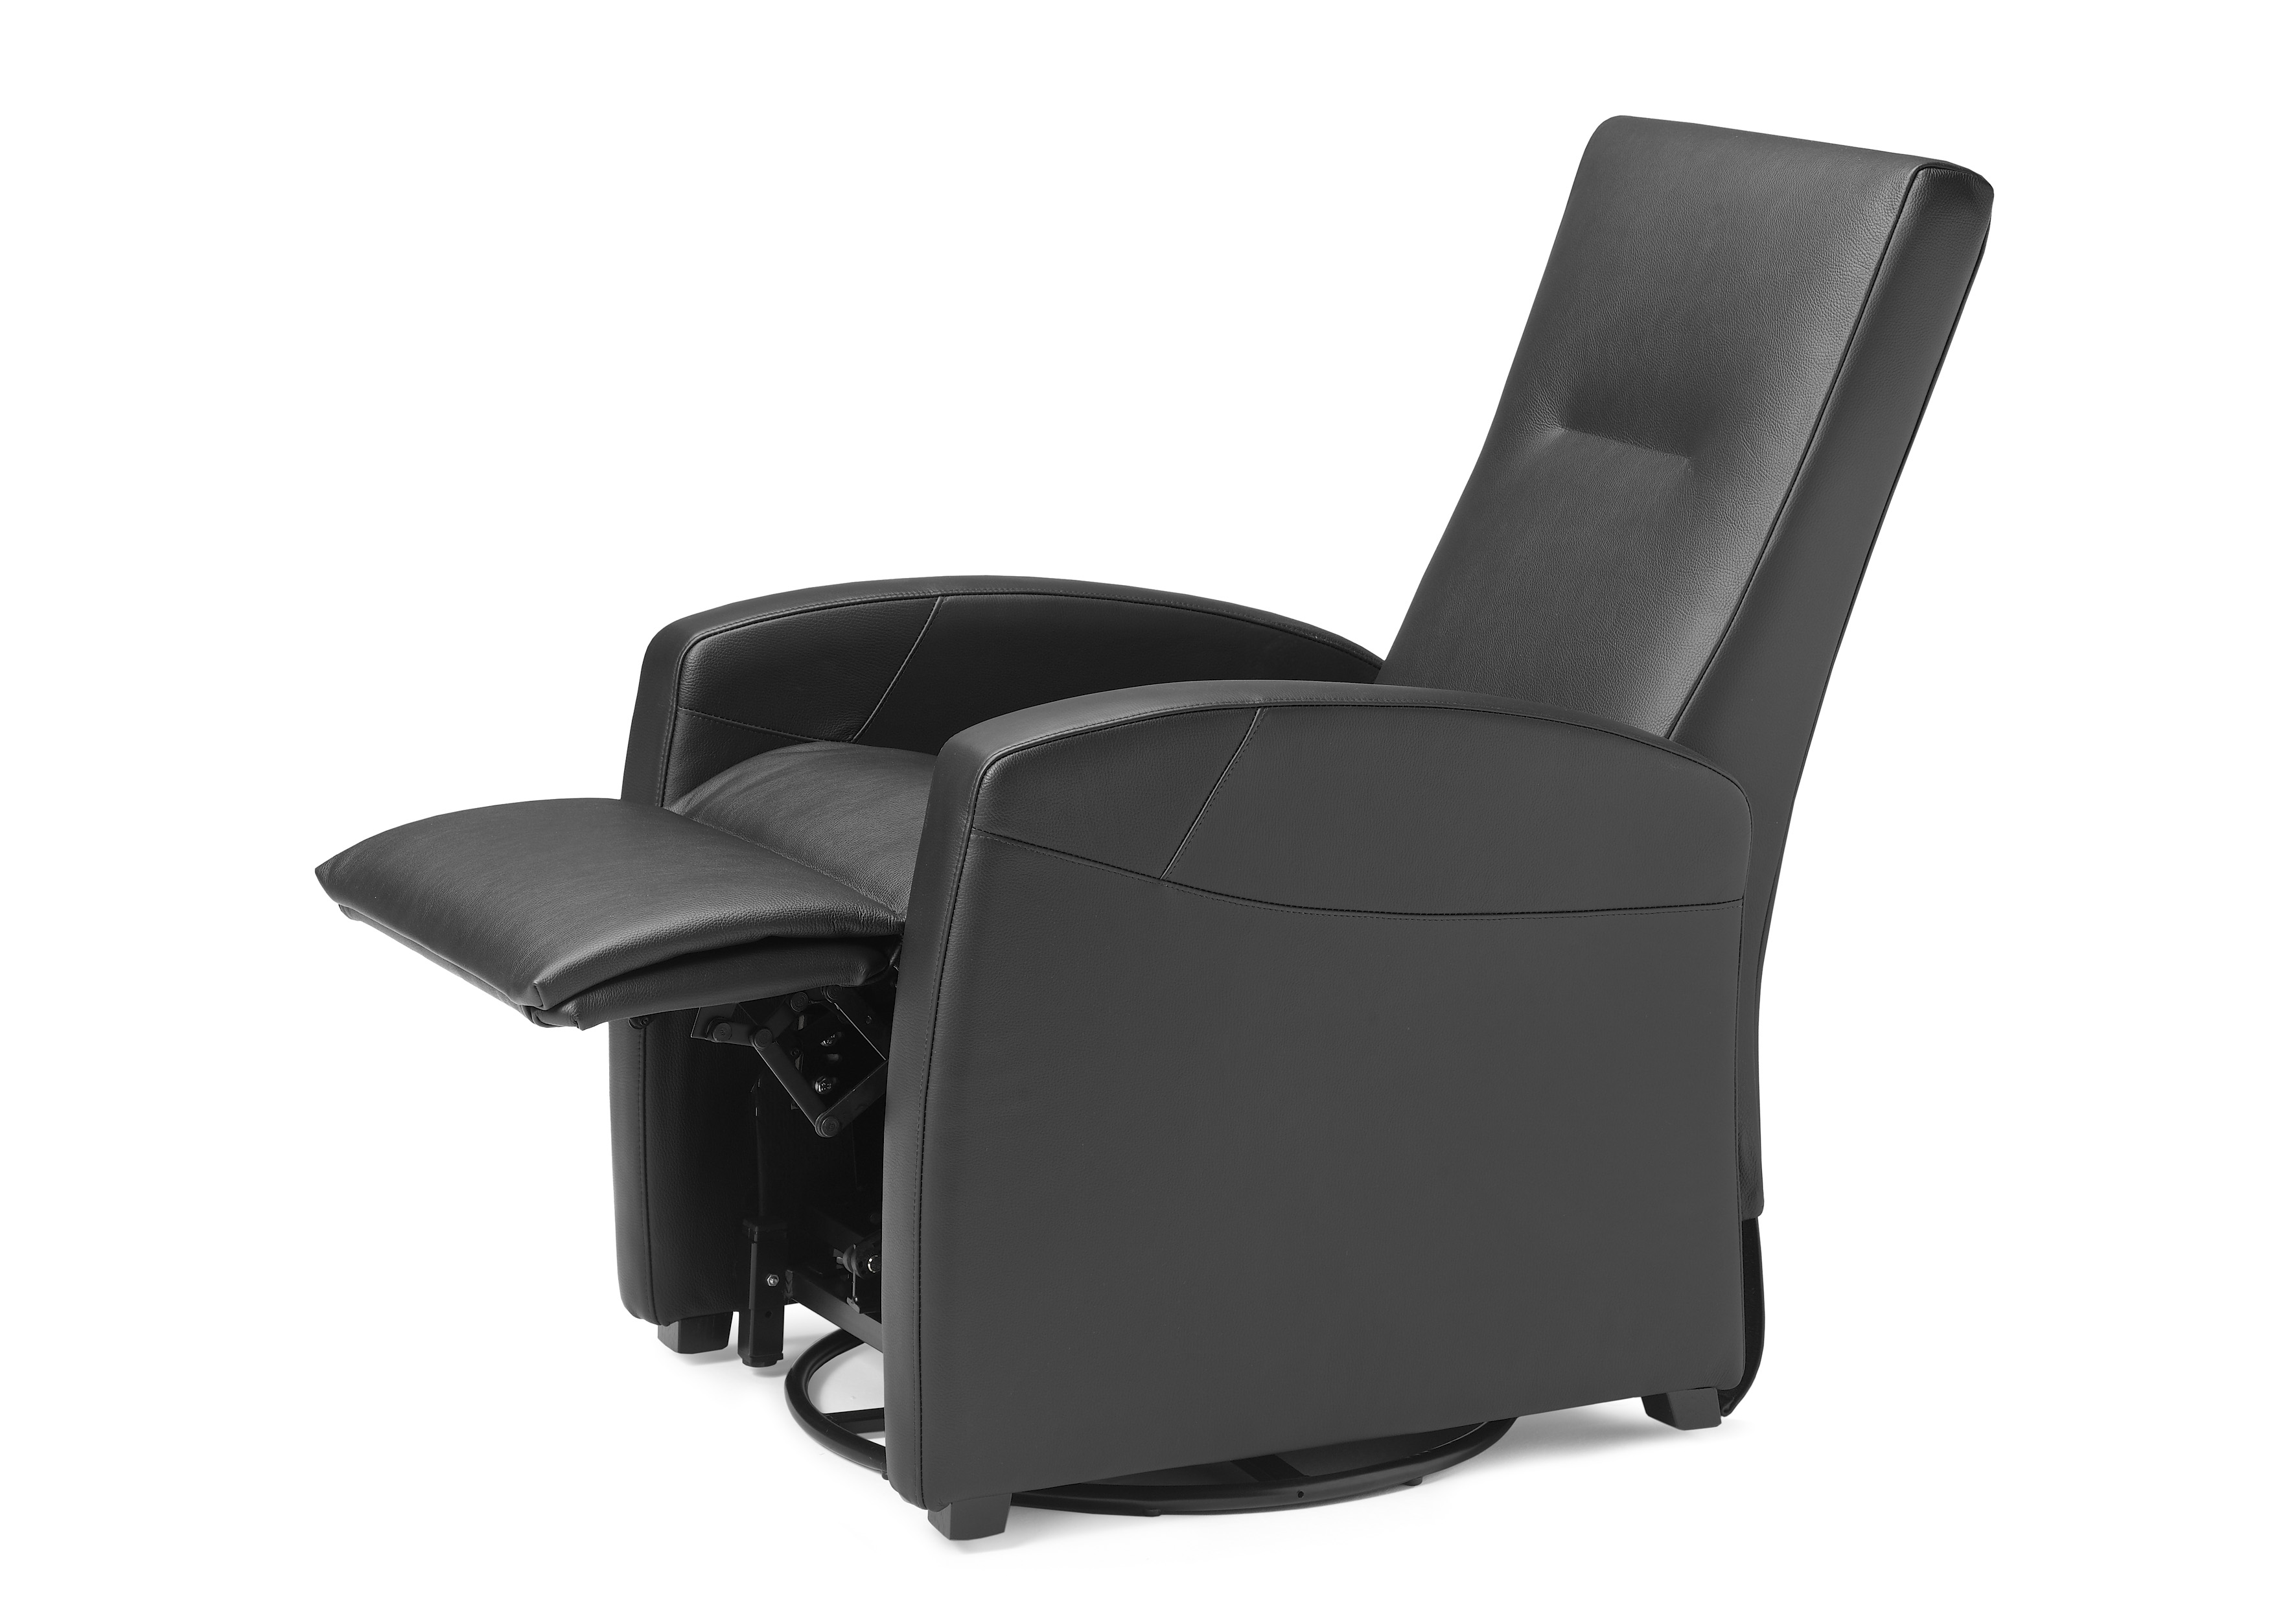 Variance relaxfauteuil - datzitgoed.com 